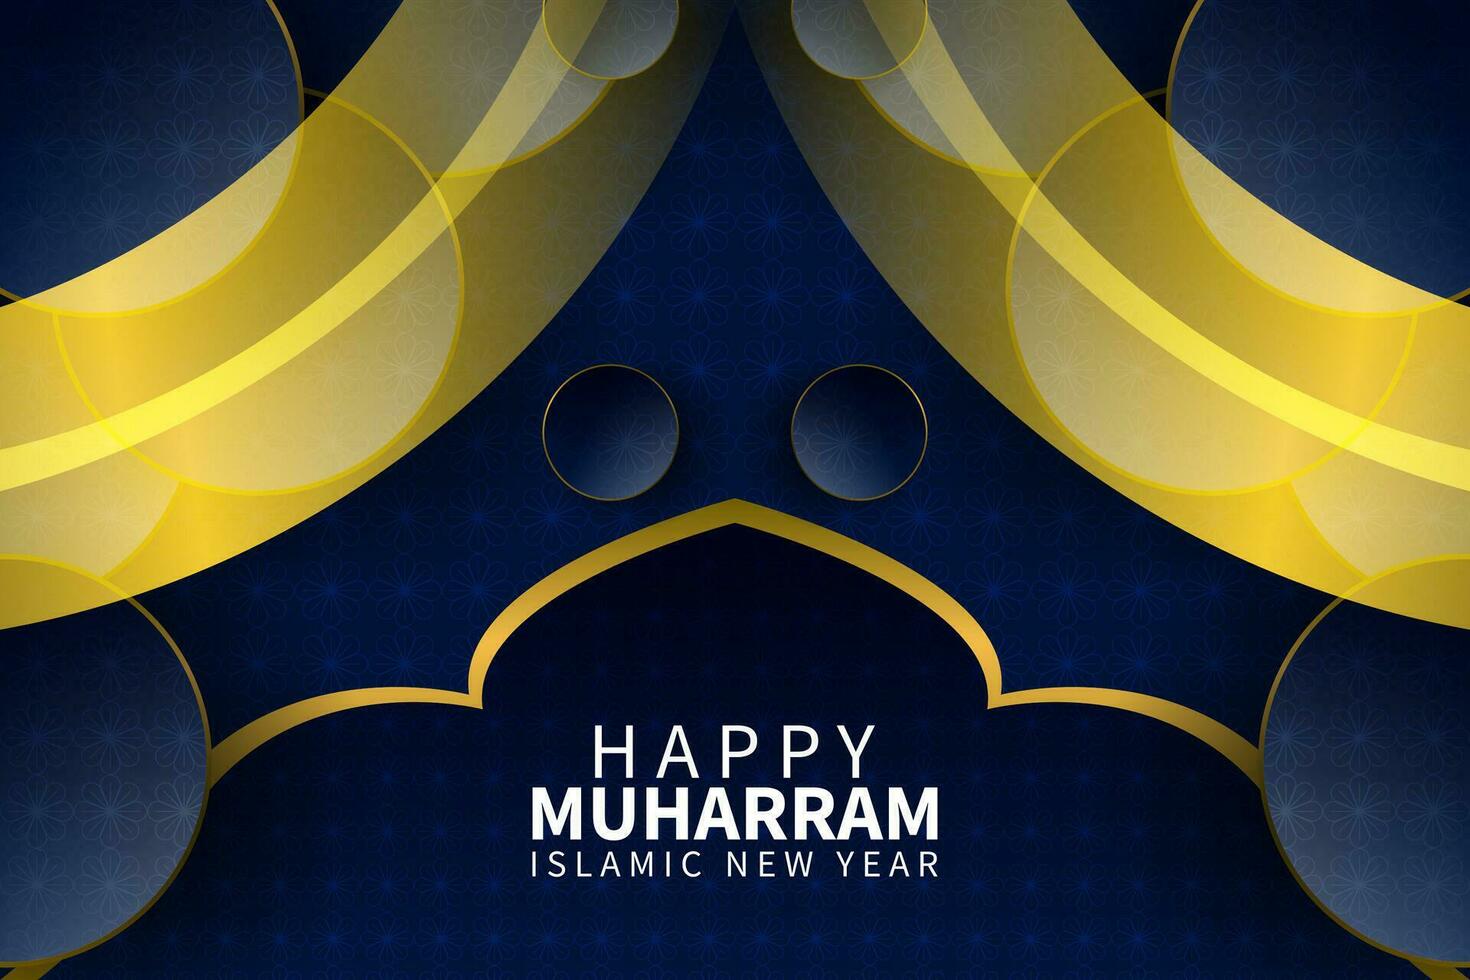 Happy Islamic New Year Celebration, Islamic new year banner template illustration design, happy day for muslims vector